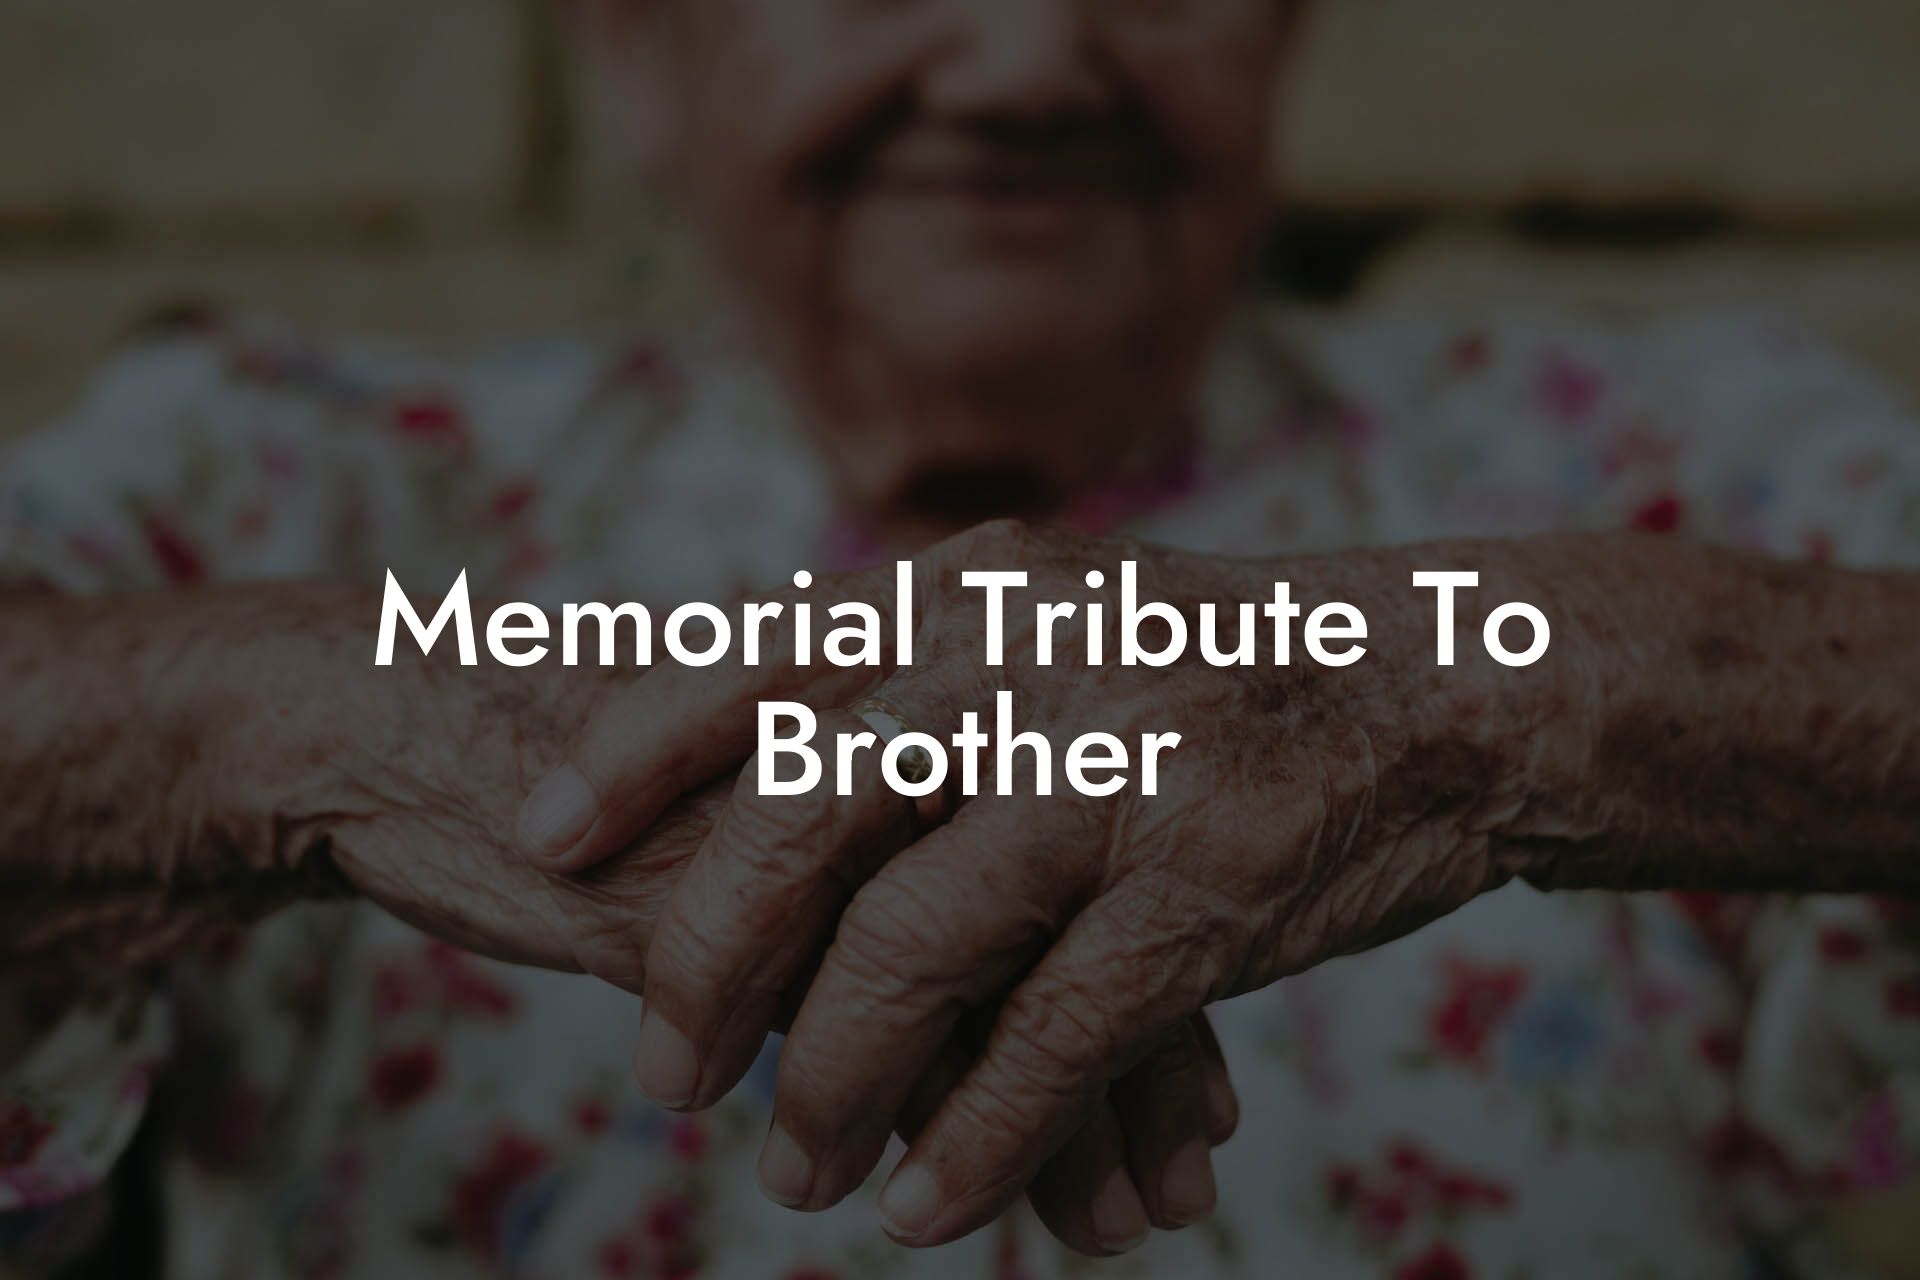 Memorial Tribute To Brother